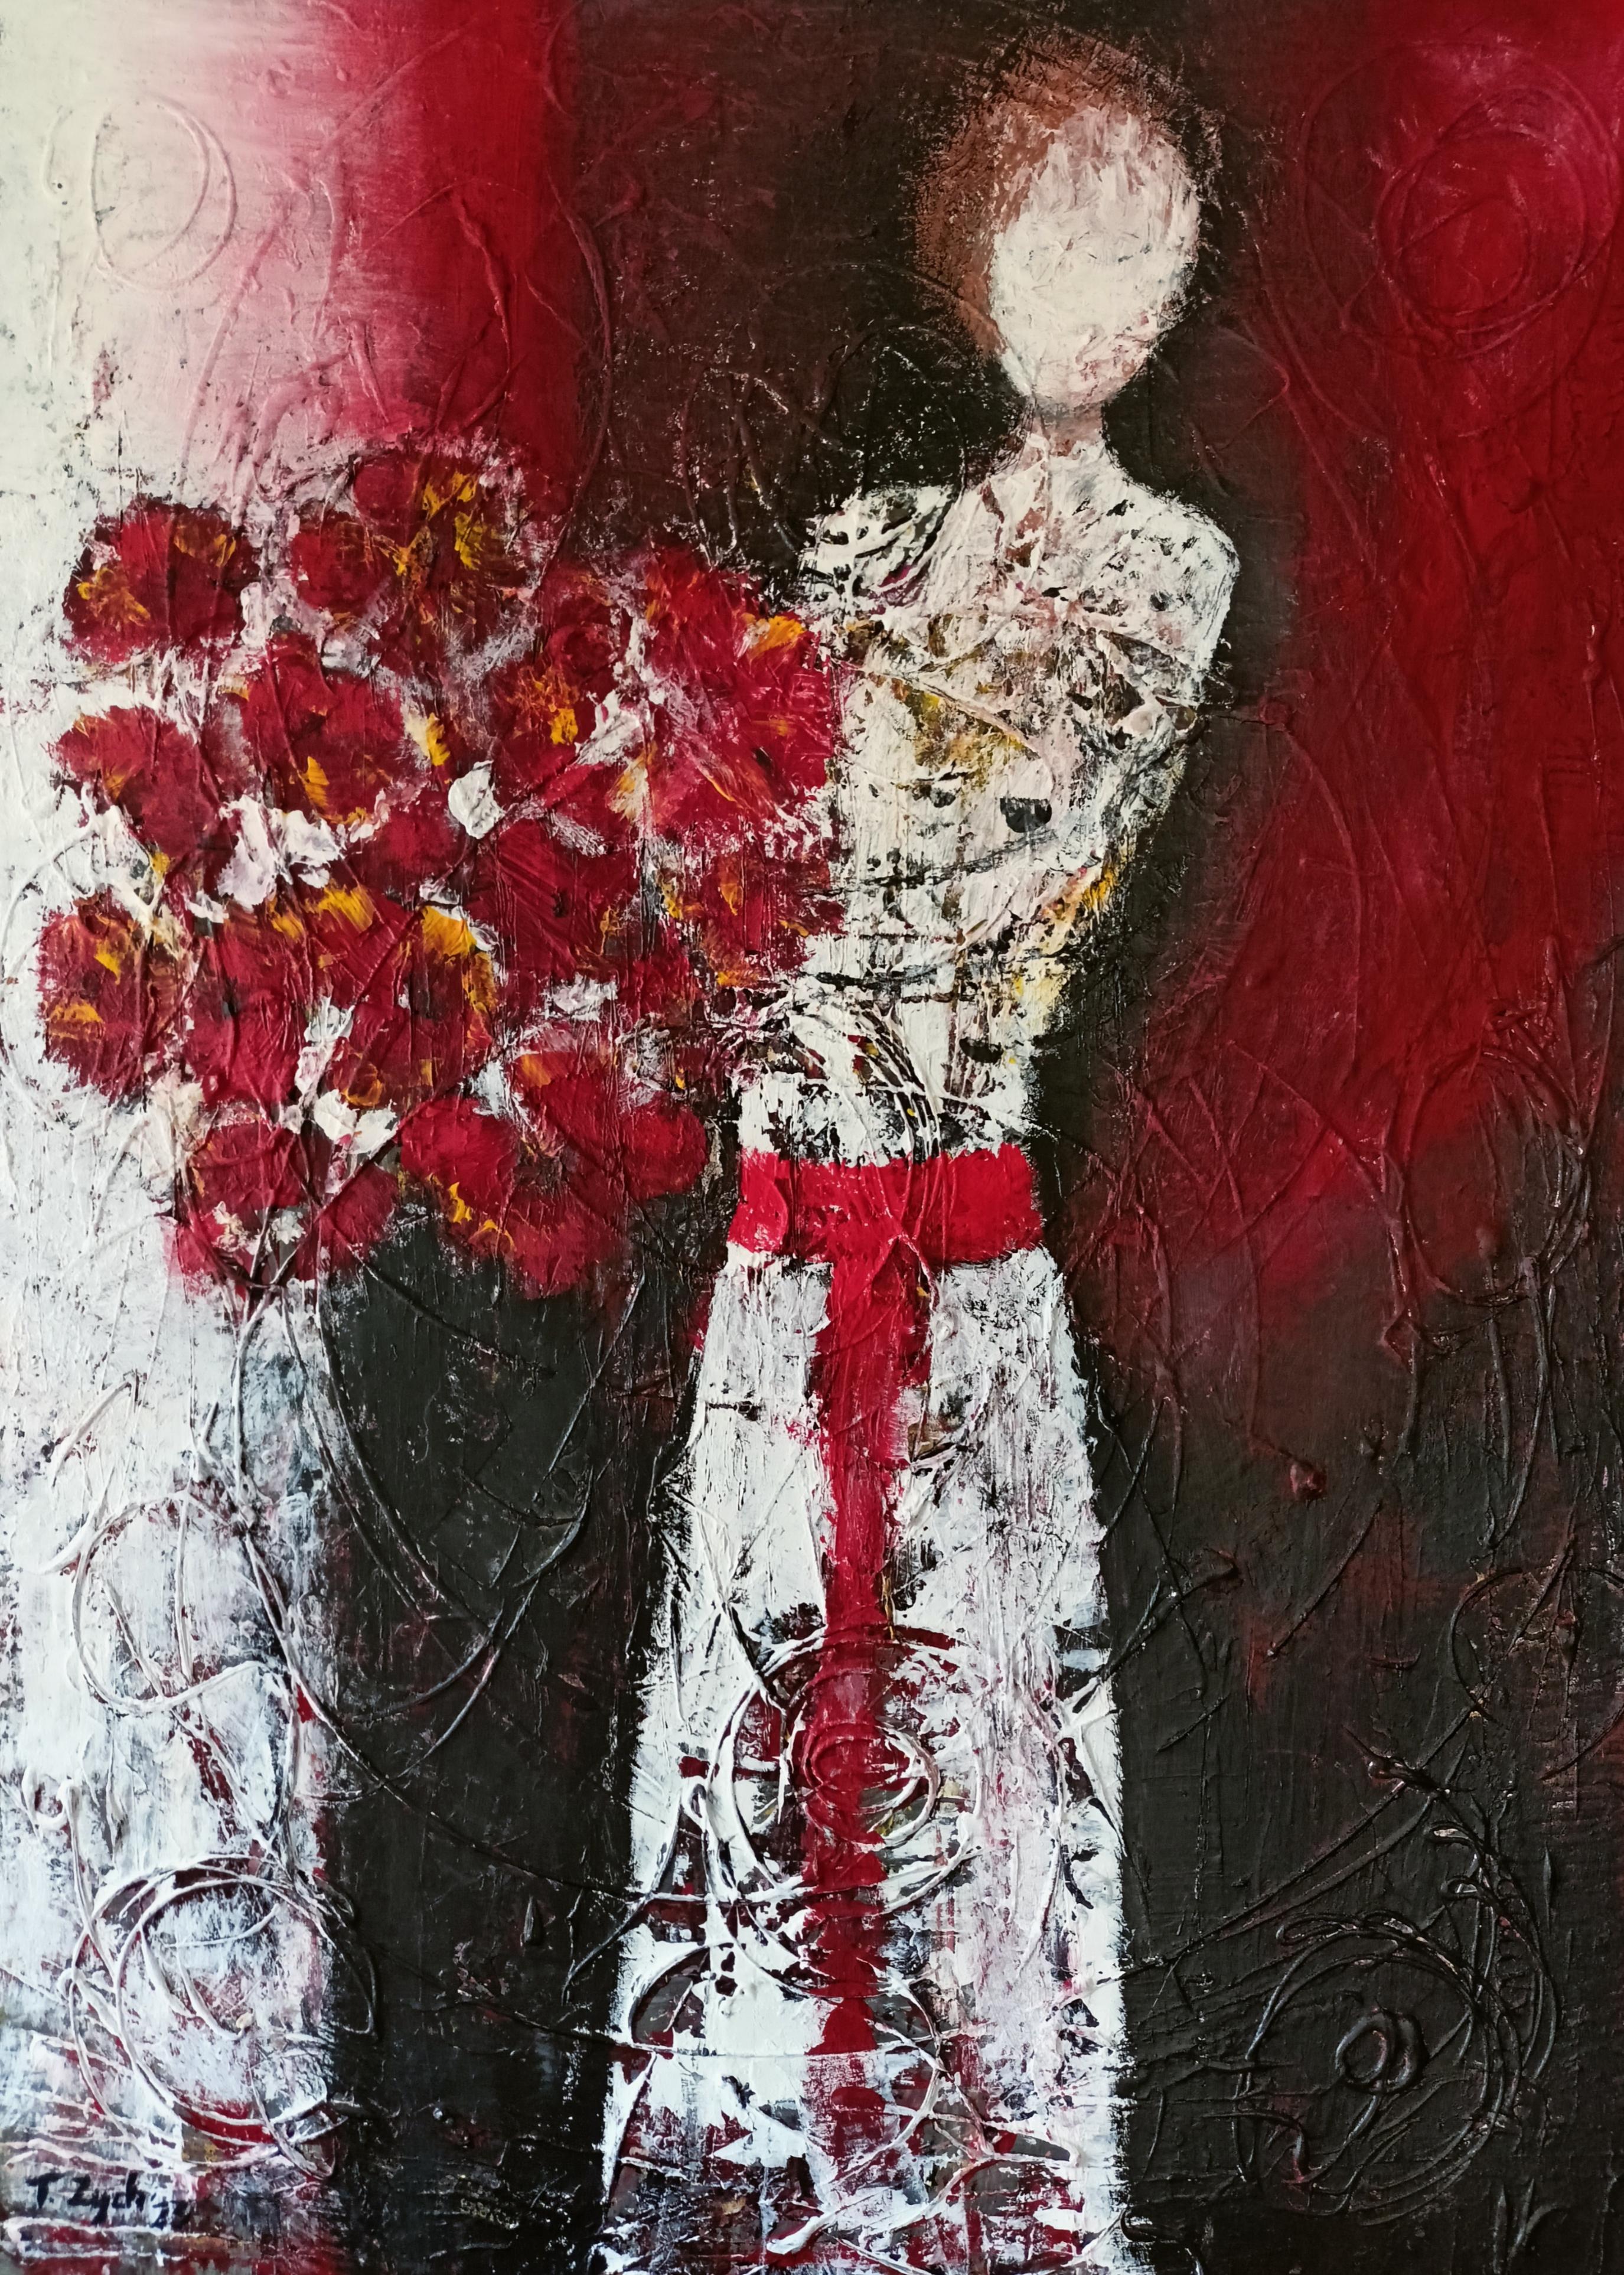 Tadeusz Zych Figurative Painting - Woman with red flowers / Acrylic on board / 103 x 73 cm